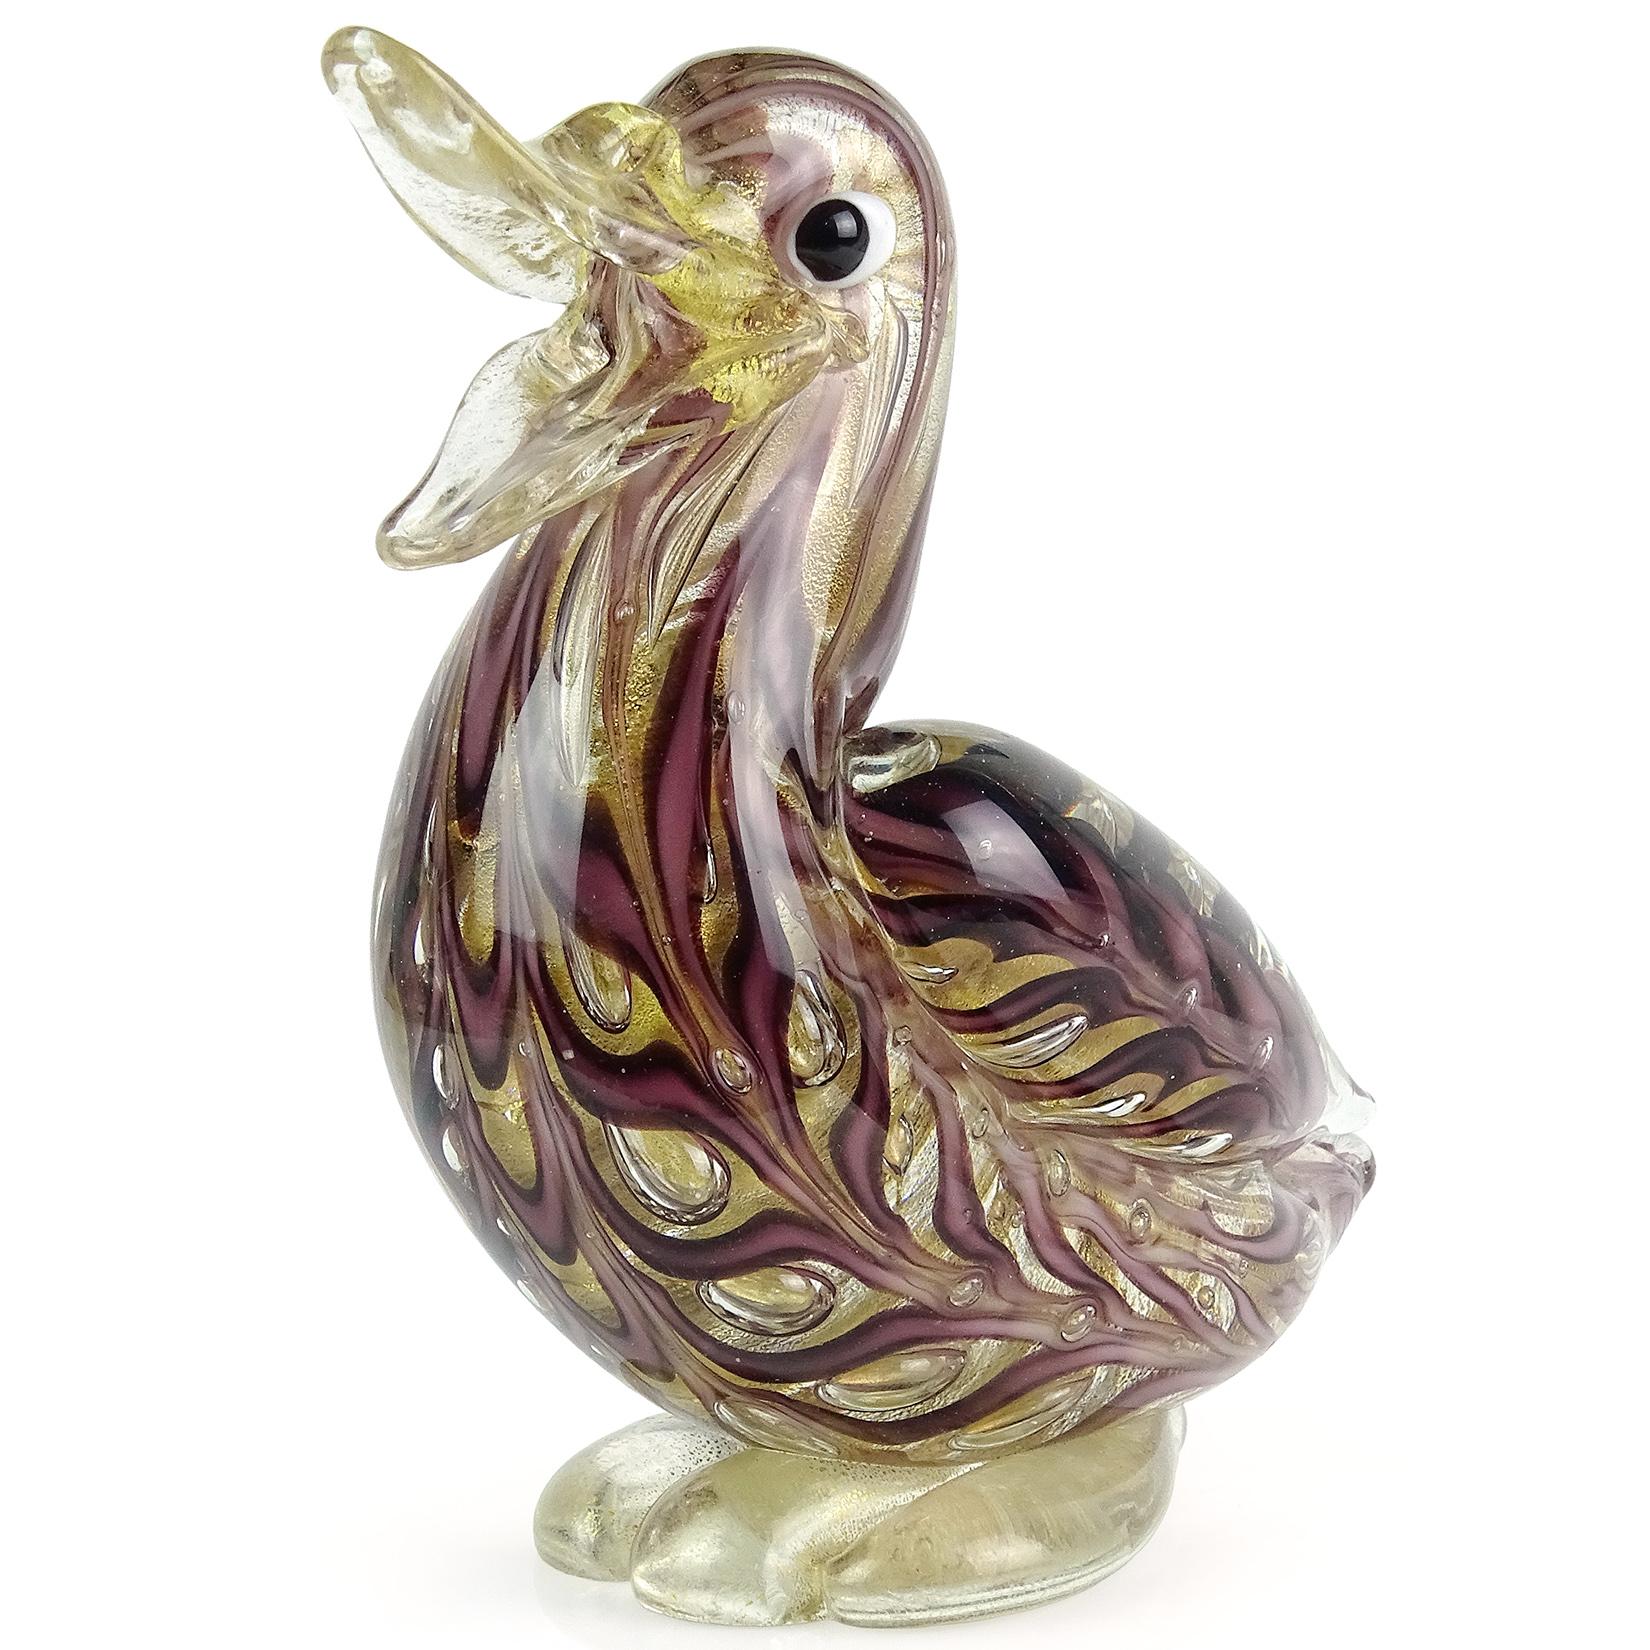 Beautiful and rare, vintage Murano hand blown purple and gold flecks Italian art glass bird duck sculpture. Documented to designer Ercole Barovier for Barovier e Toso. The figure still retains the original Barovier label underneath, marked item